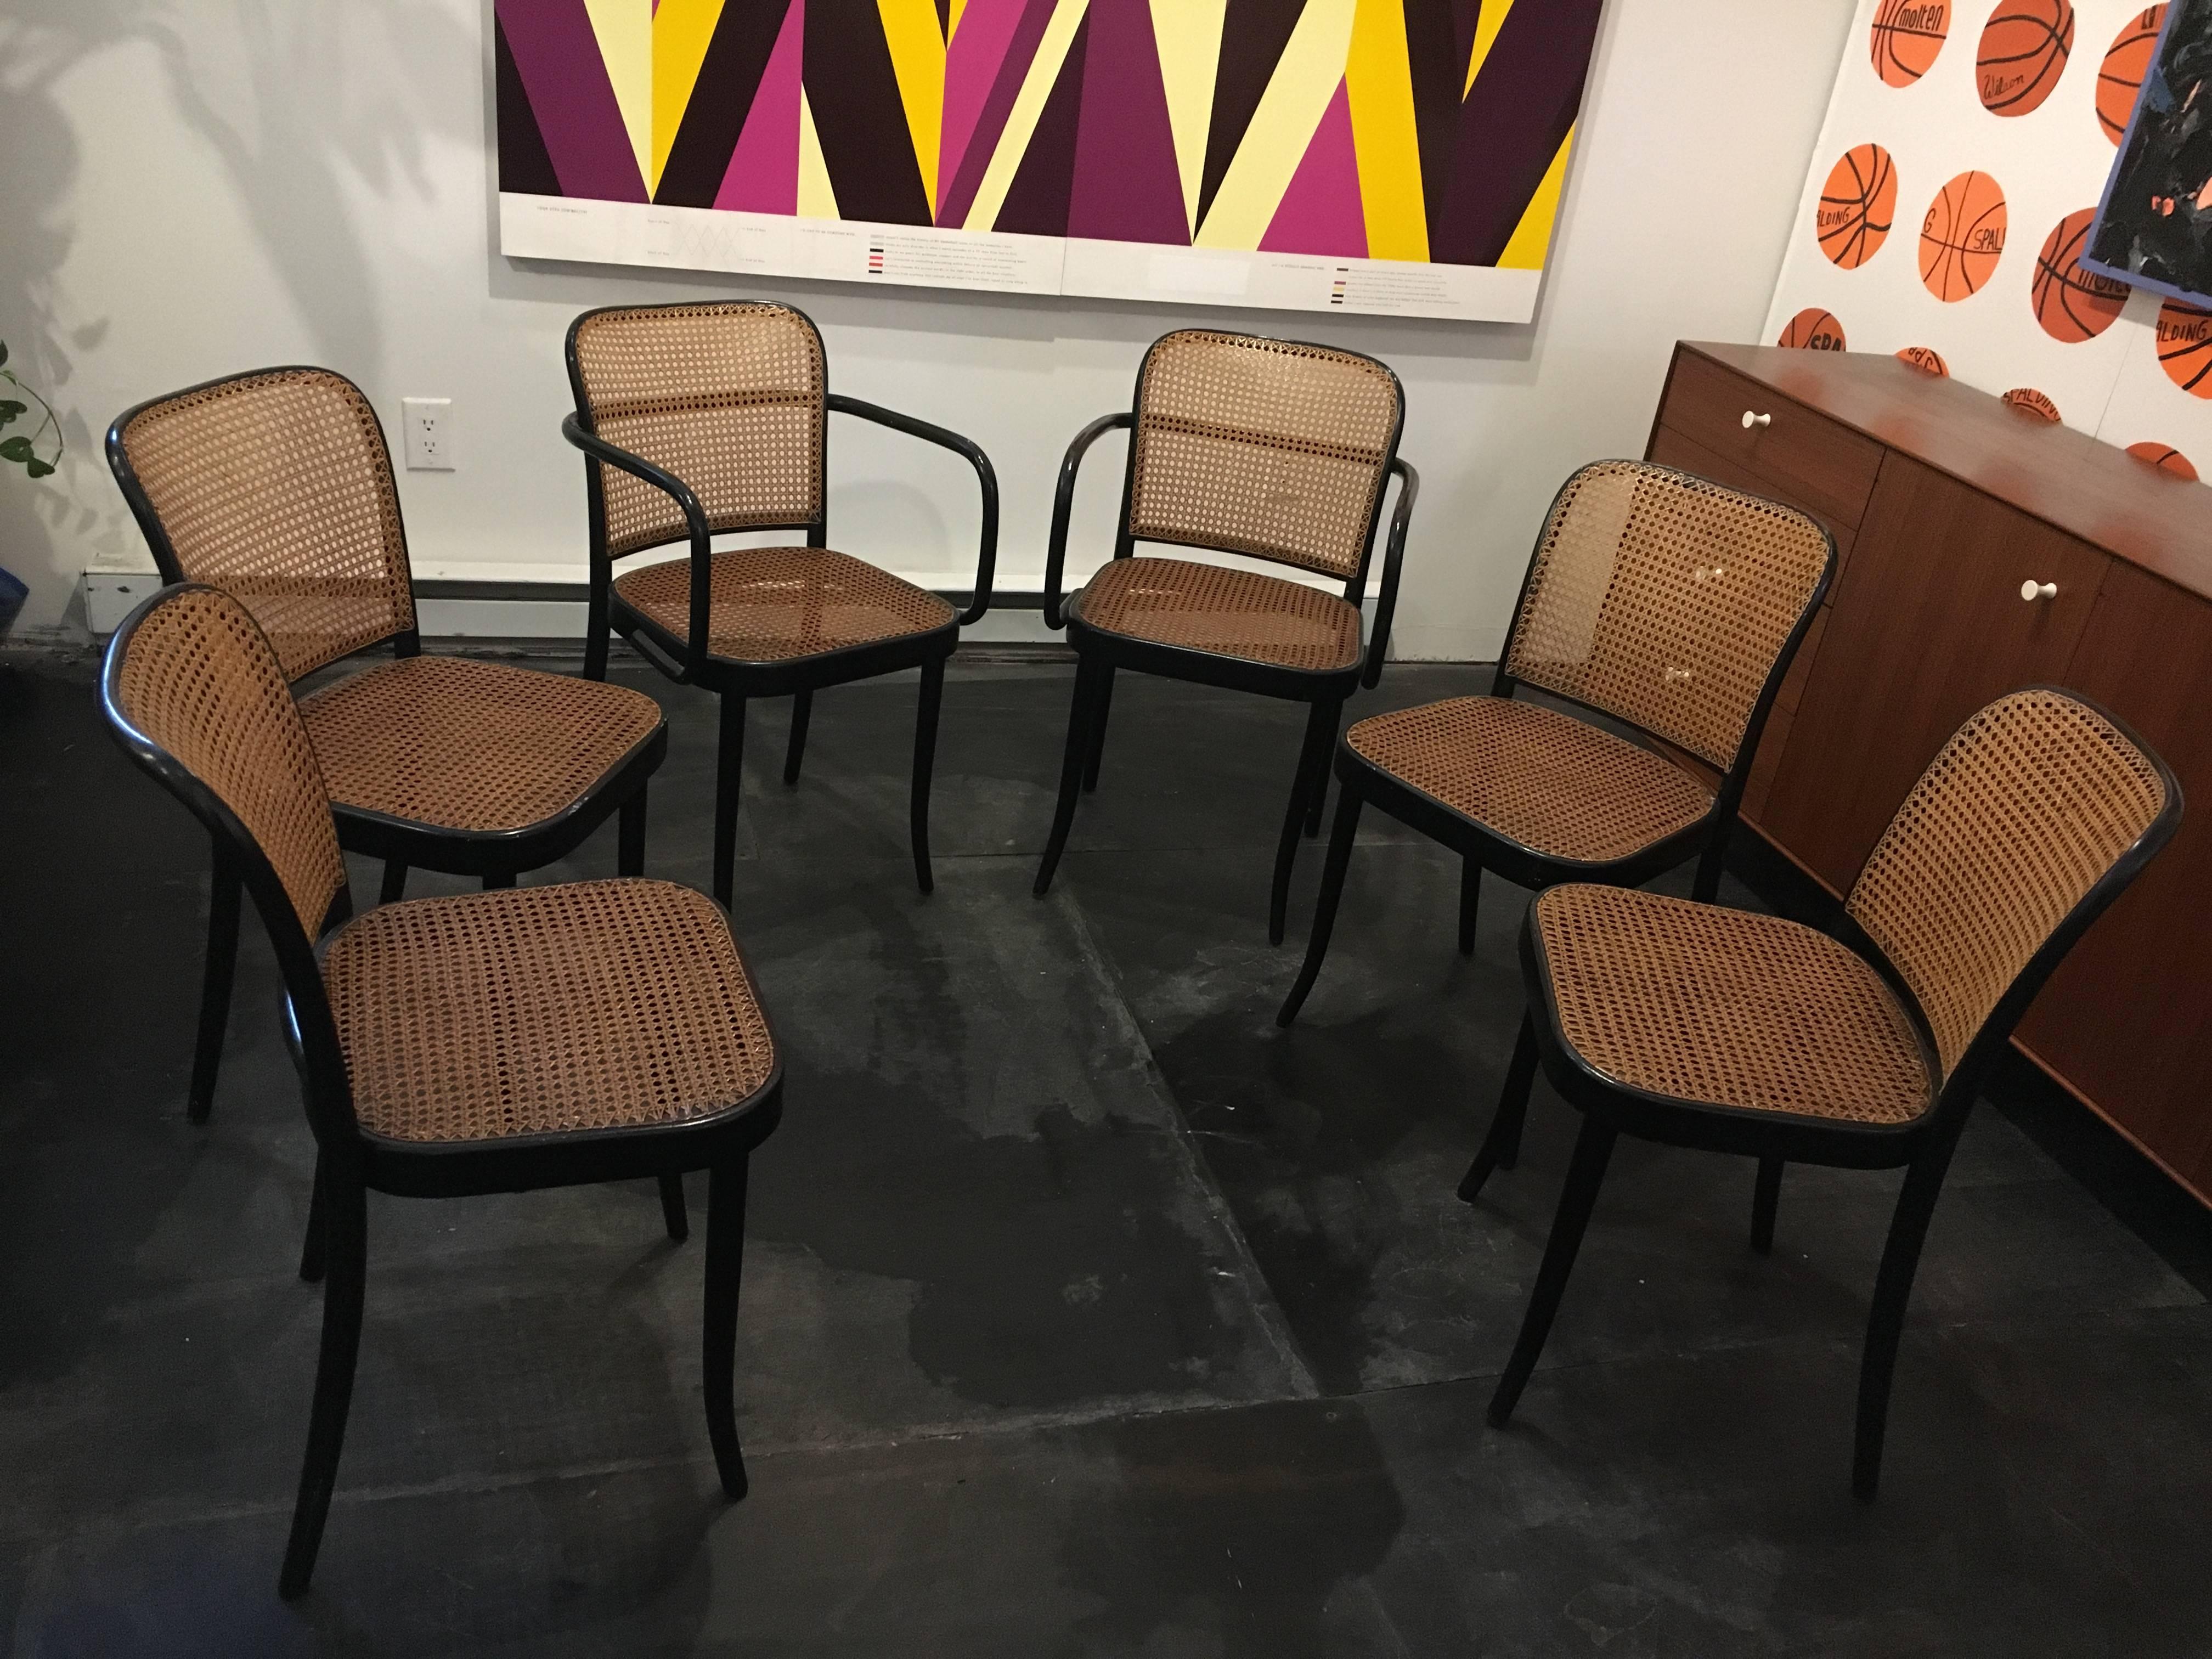 Set of six, two arm and four side chairs, designed by Josef Frank & Josef Hoffmann in the 1920s.
These chairs were manufactured by Stendig, bentwood frames in birch with cane seats and backs.